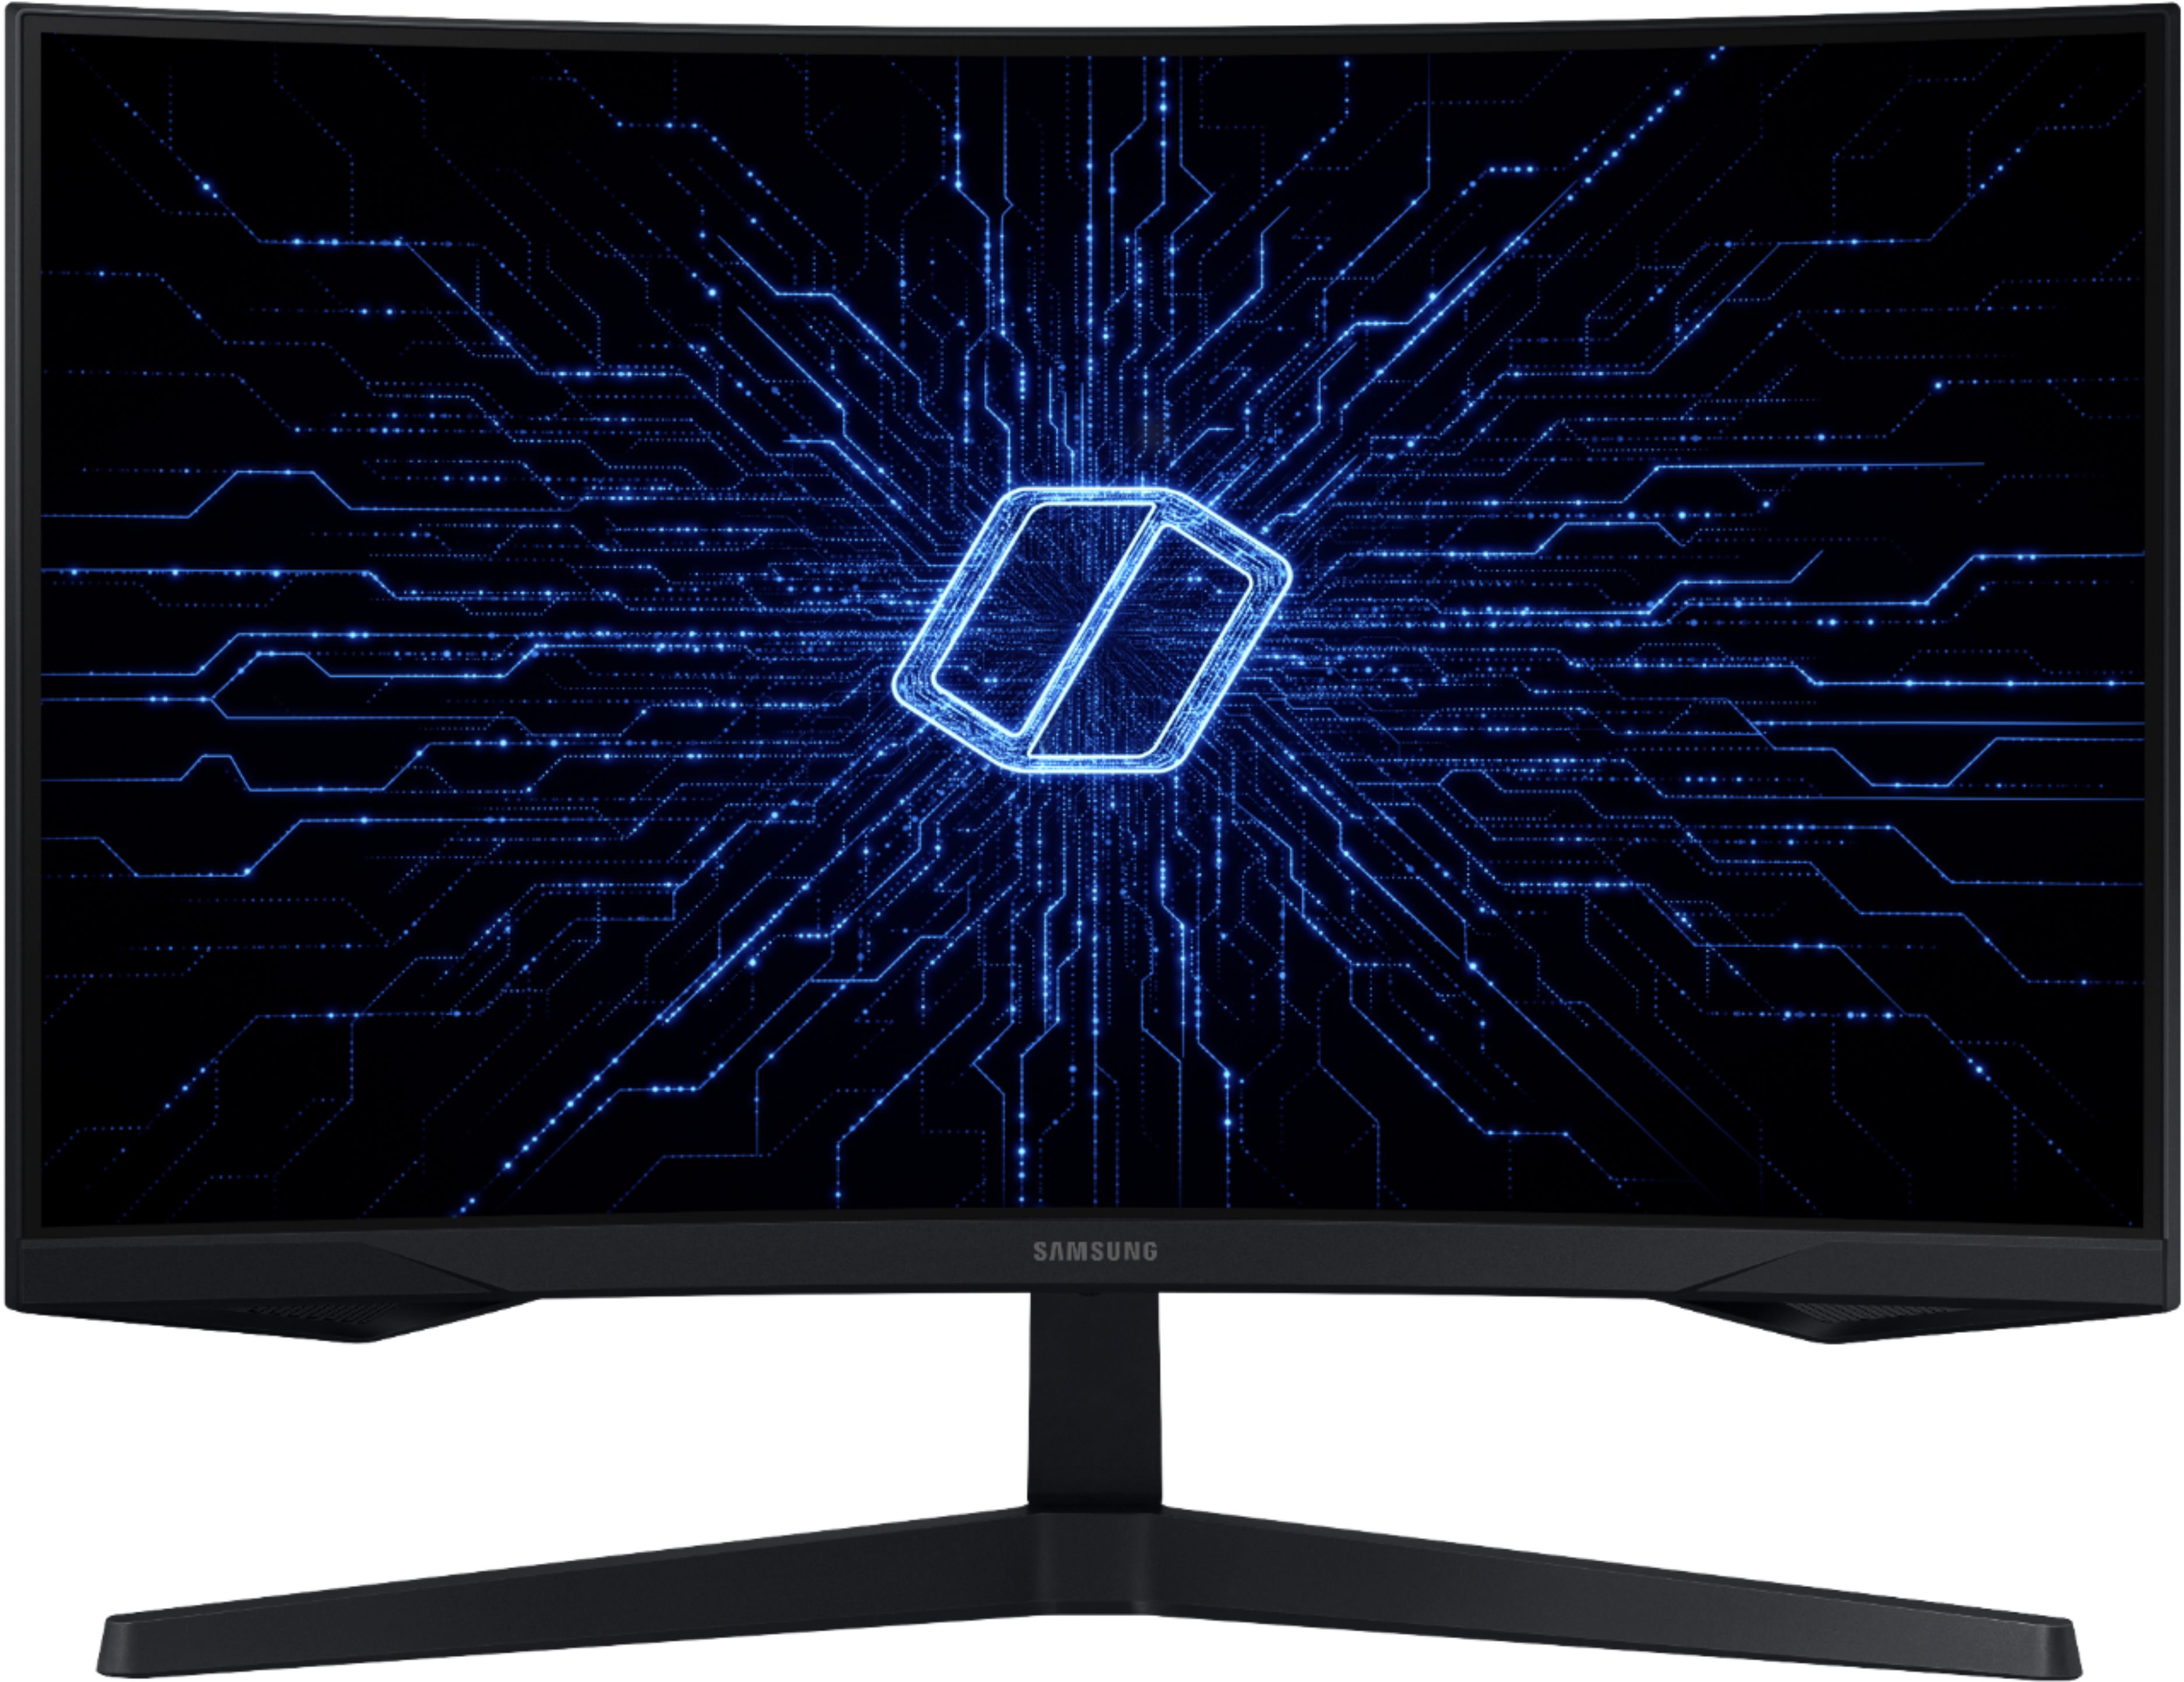 32 G5 Odyssey Gaming Monitor With 1000R Curved Screen - LC32G57TQWNXDC